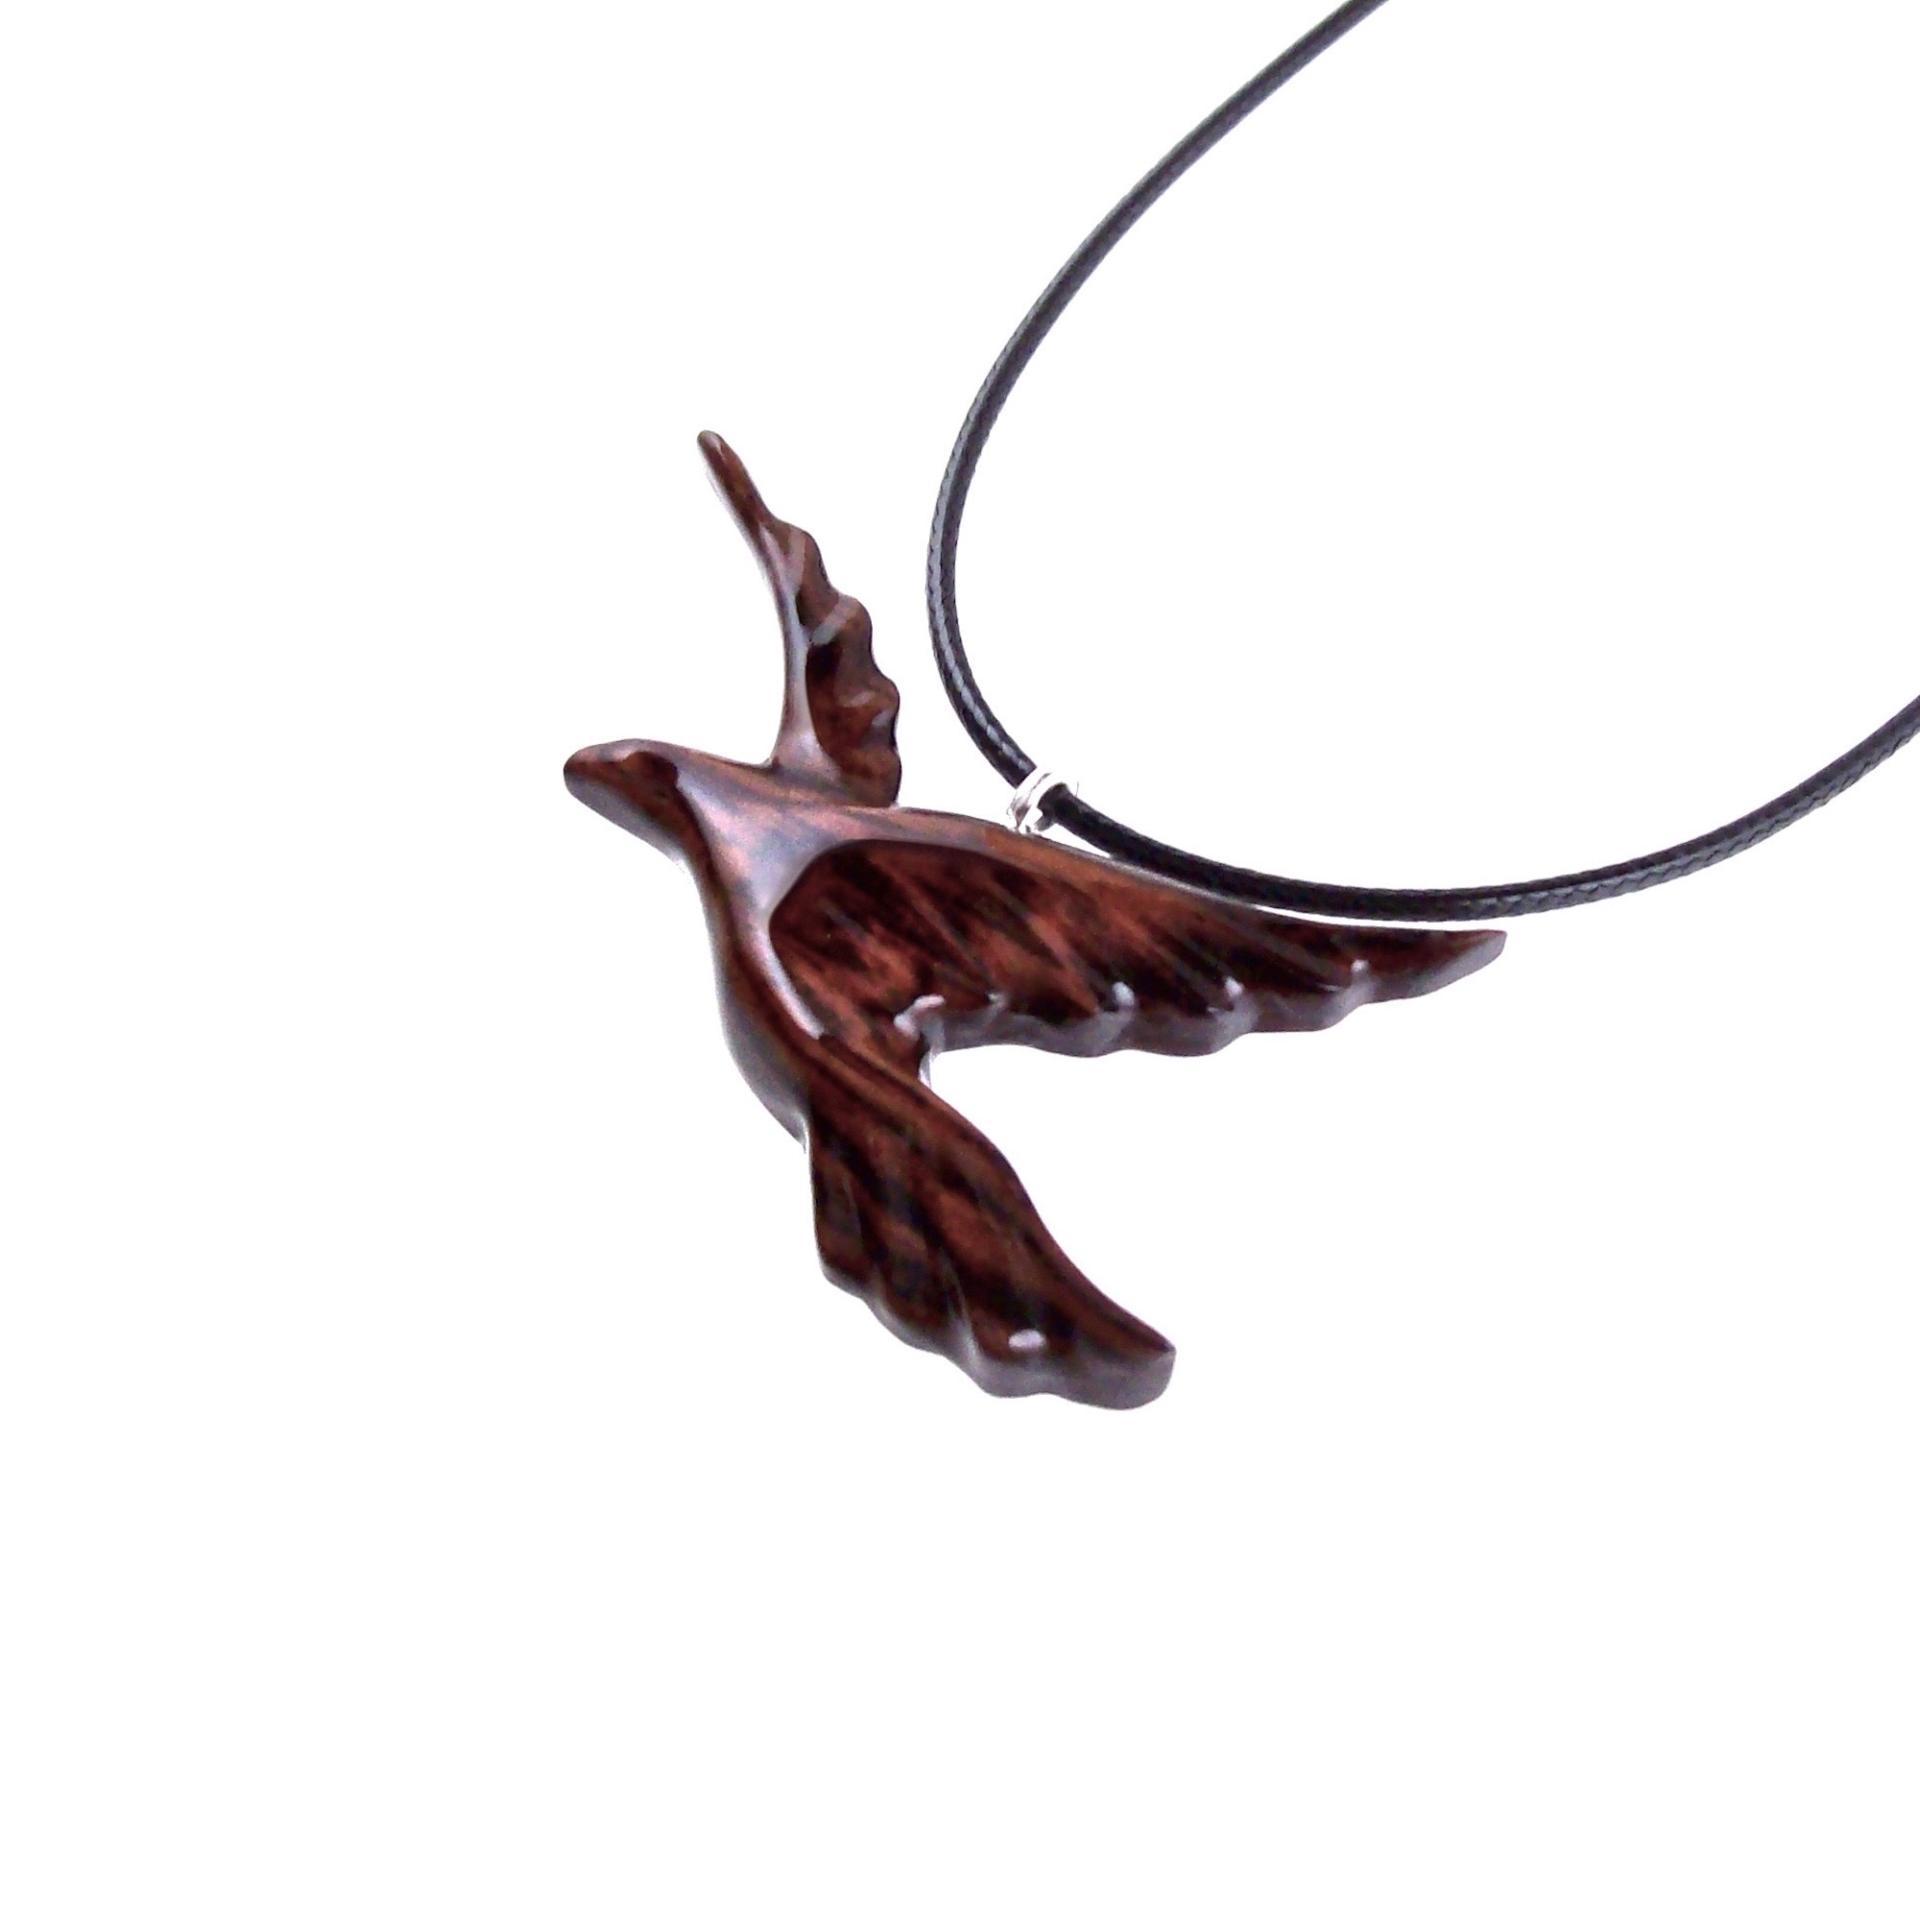 Dove Pendant, Hand Carved Flying Wooden Bird Necklace, One of a Kind Wood Jewelry Gift for Her